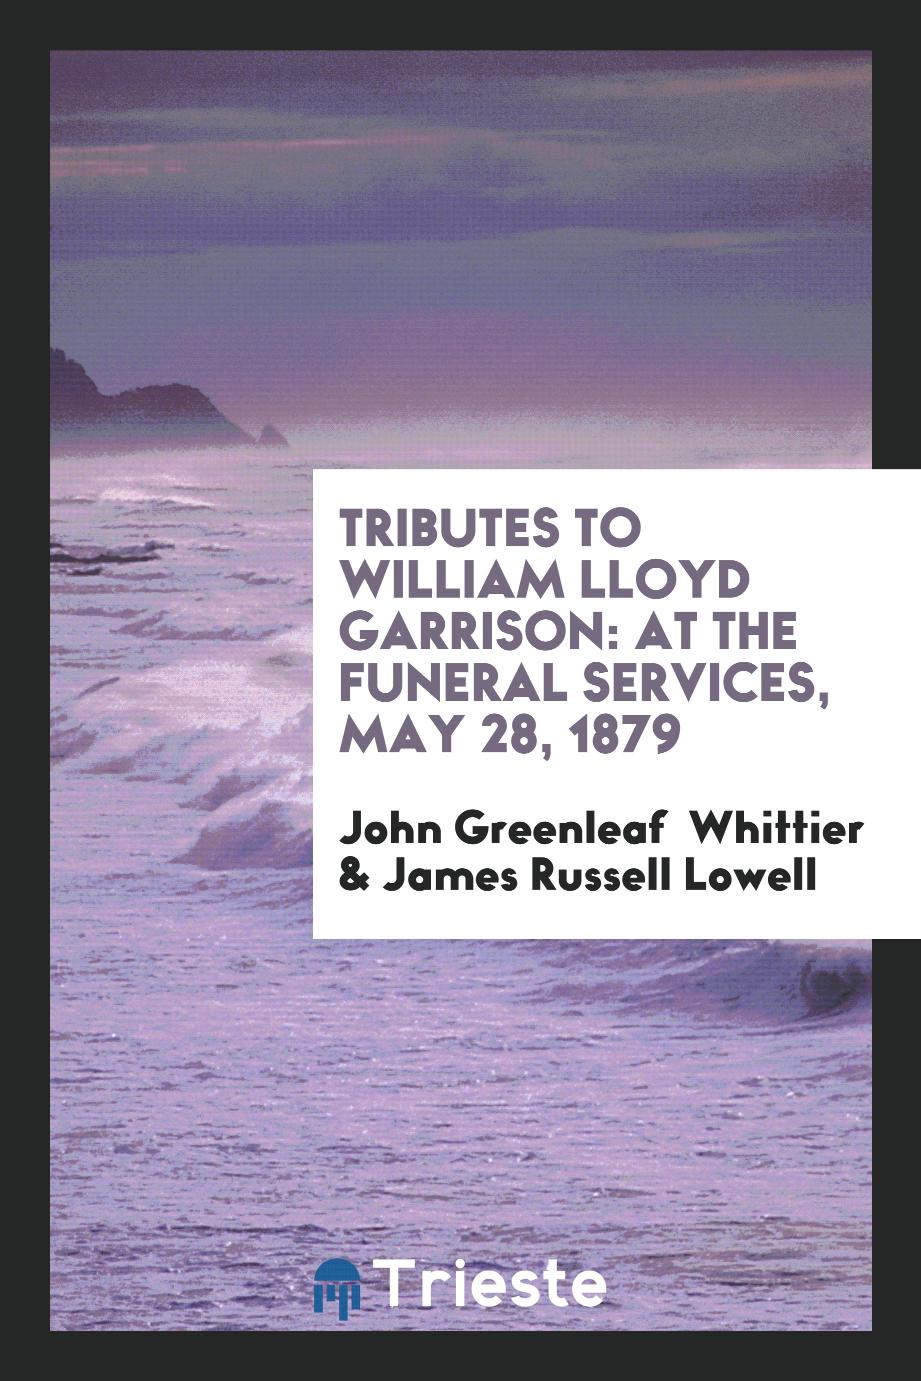 Tributes to William Lloyd Garrison: At the Funeral Services, May 28, 1879